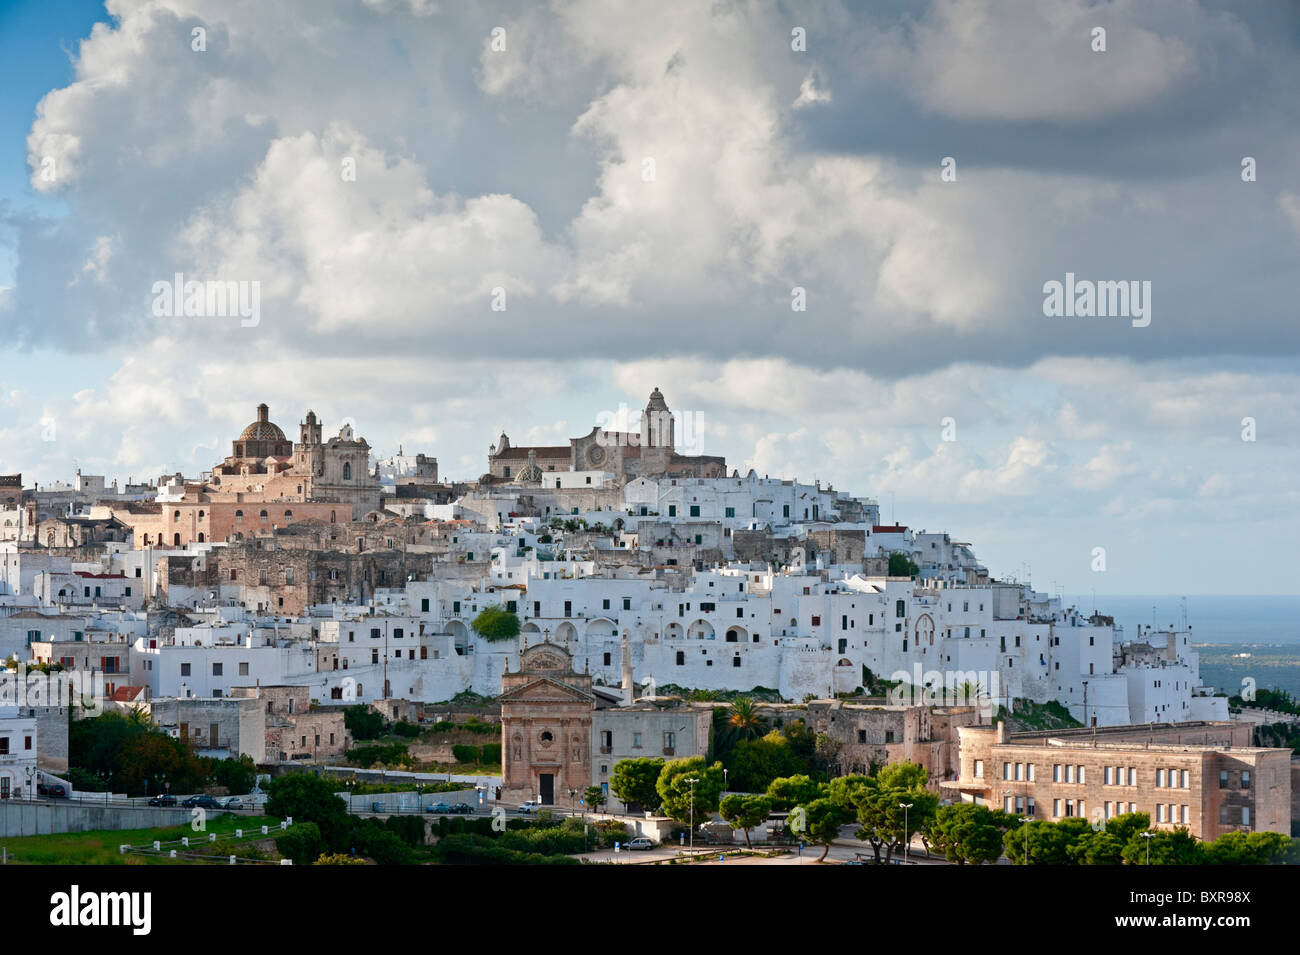 The old town of Ostuni, Puglia, Italy Stock Photo